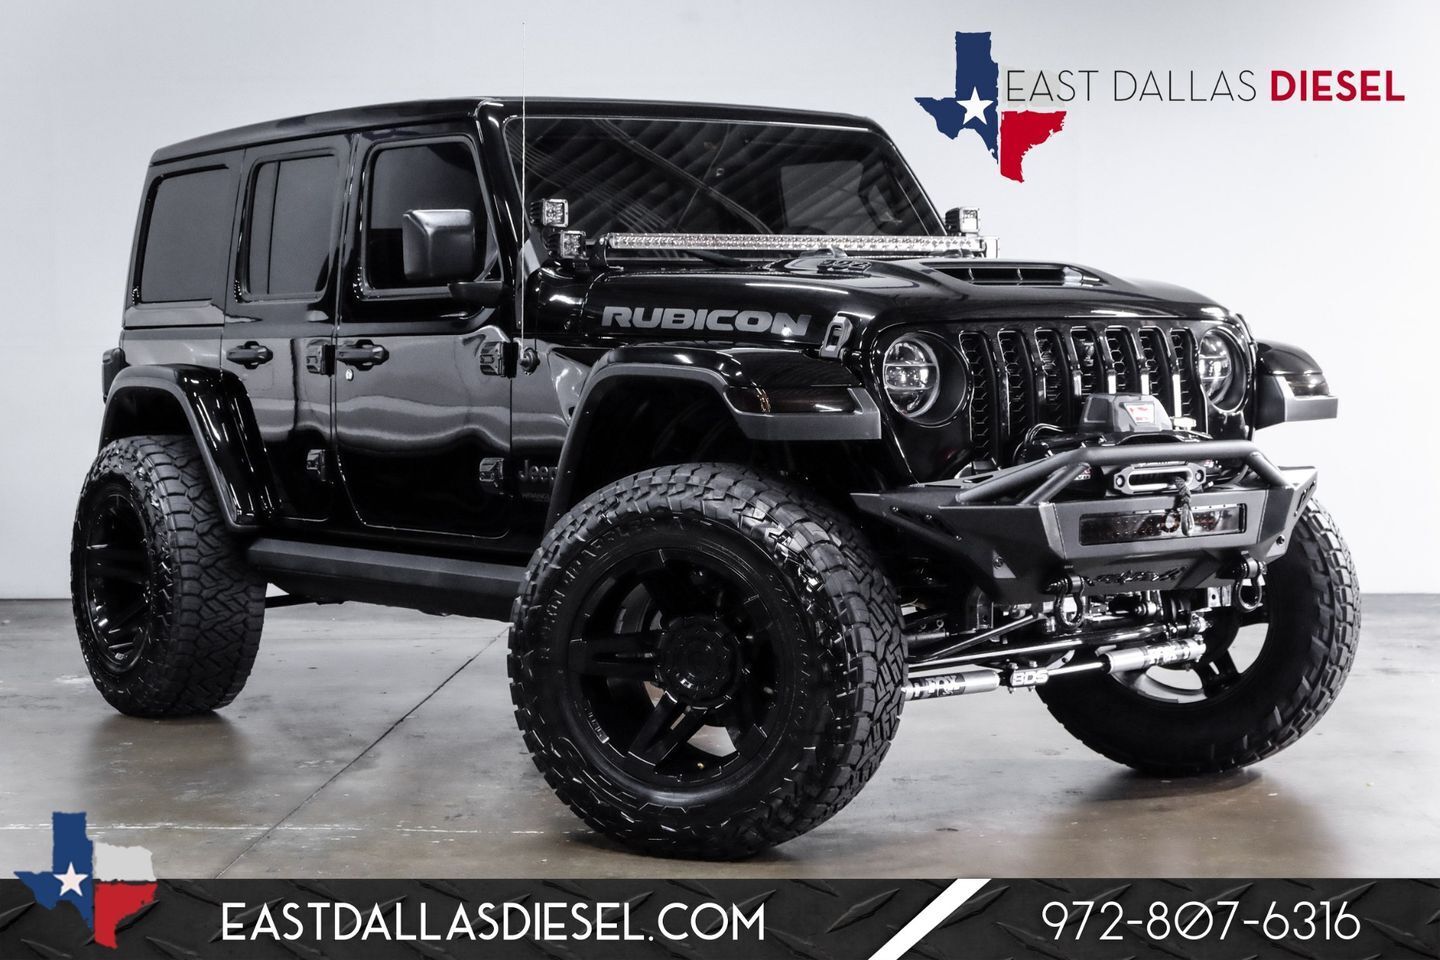 Black Clearcoat Jeep Wrangler Unlimited with 597 Miles available now!